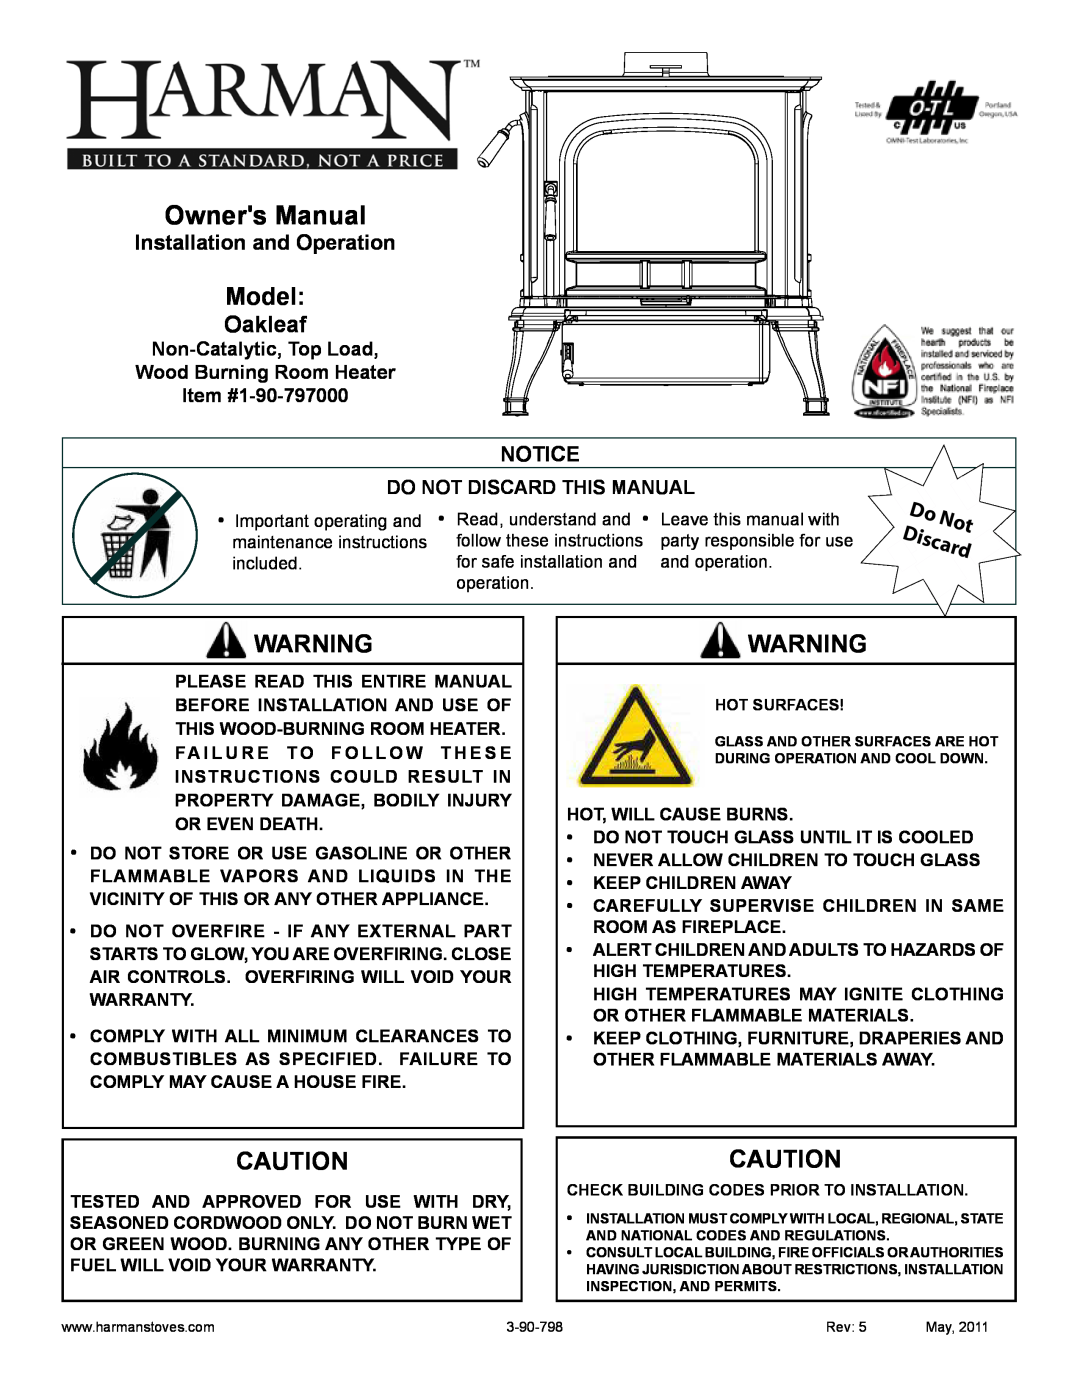 Harman Stove Company 1-90-79700 owner manual Model, Oakleaf, Non-Catalytic,Top Load Wood Burning Room Heater 